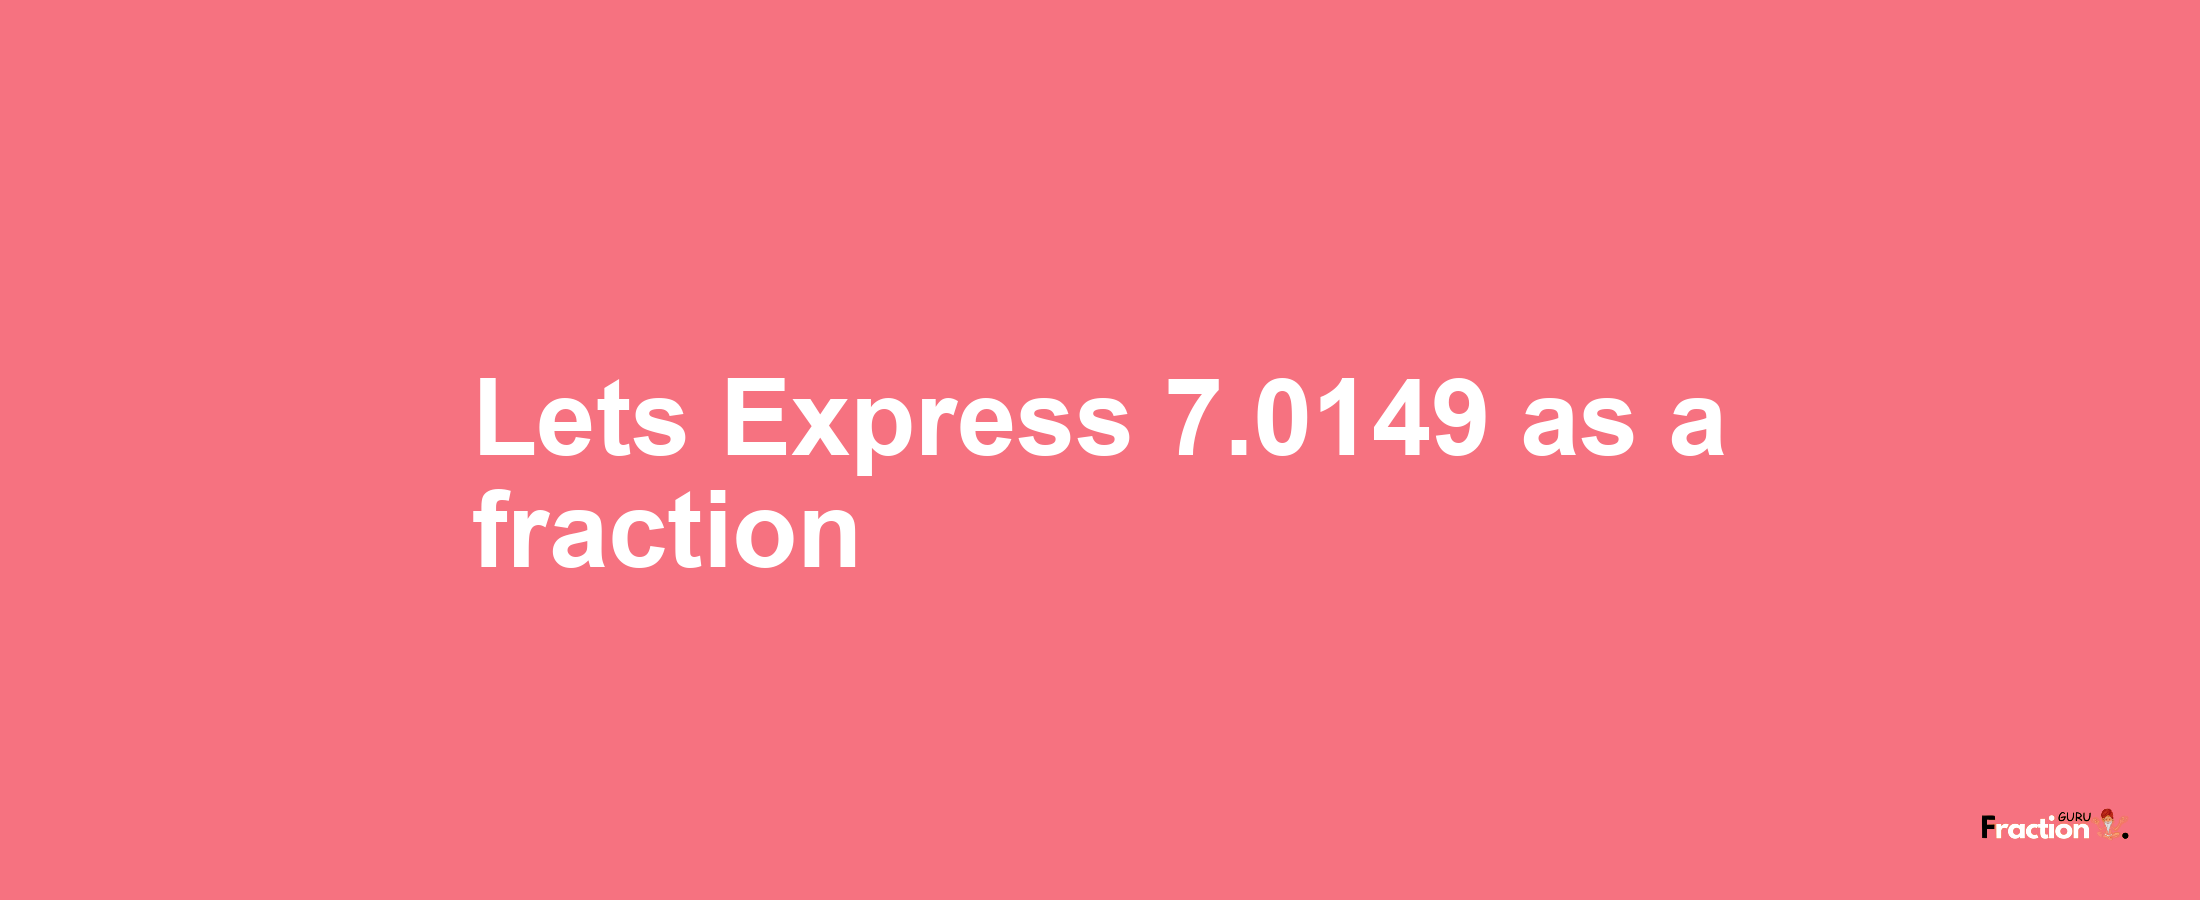 Lets Express 7.0149 as afraction